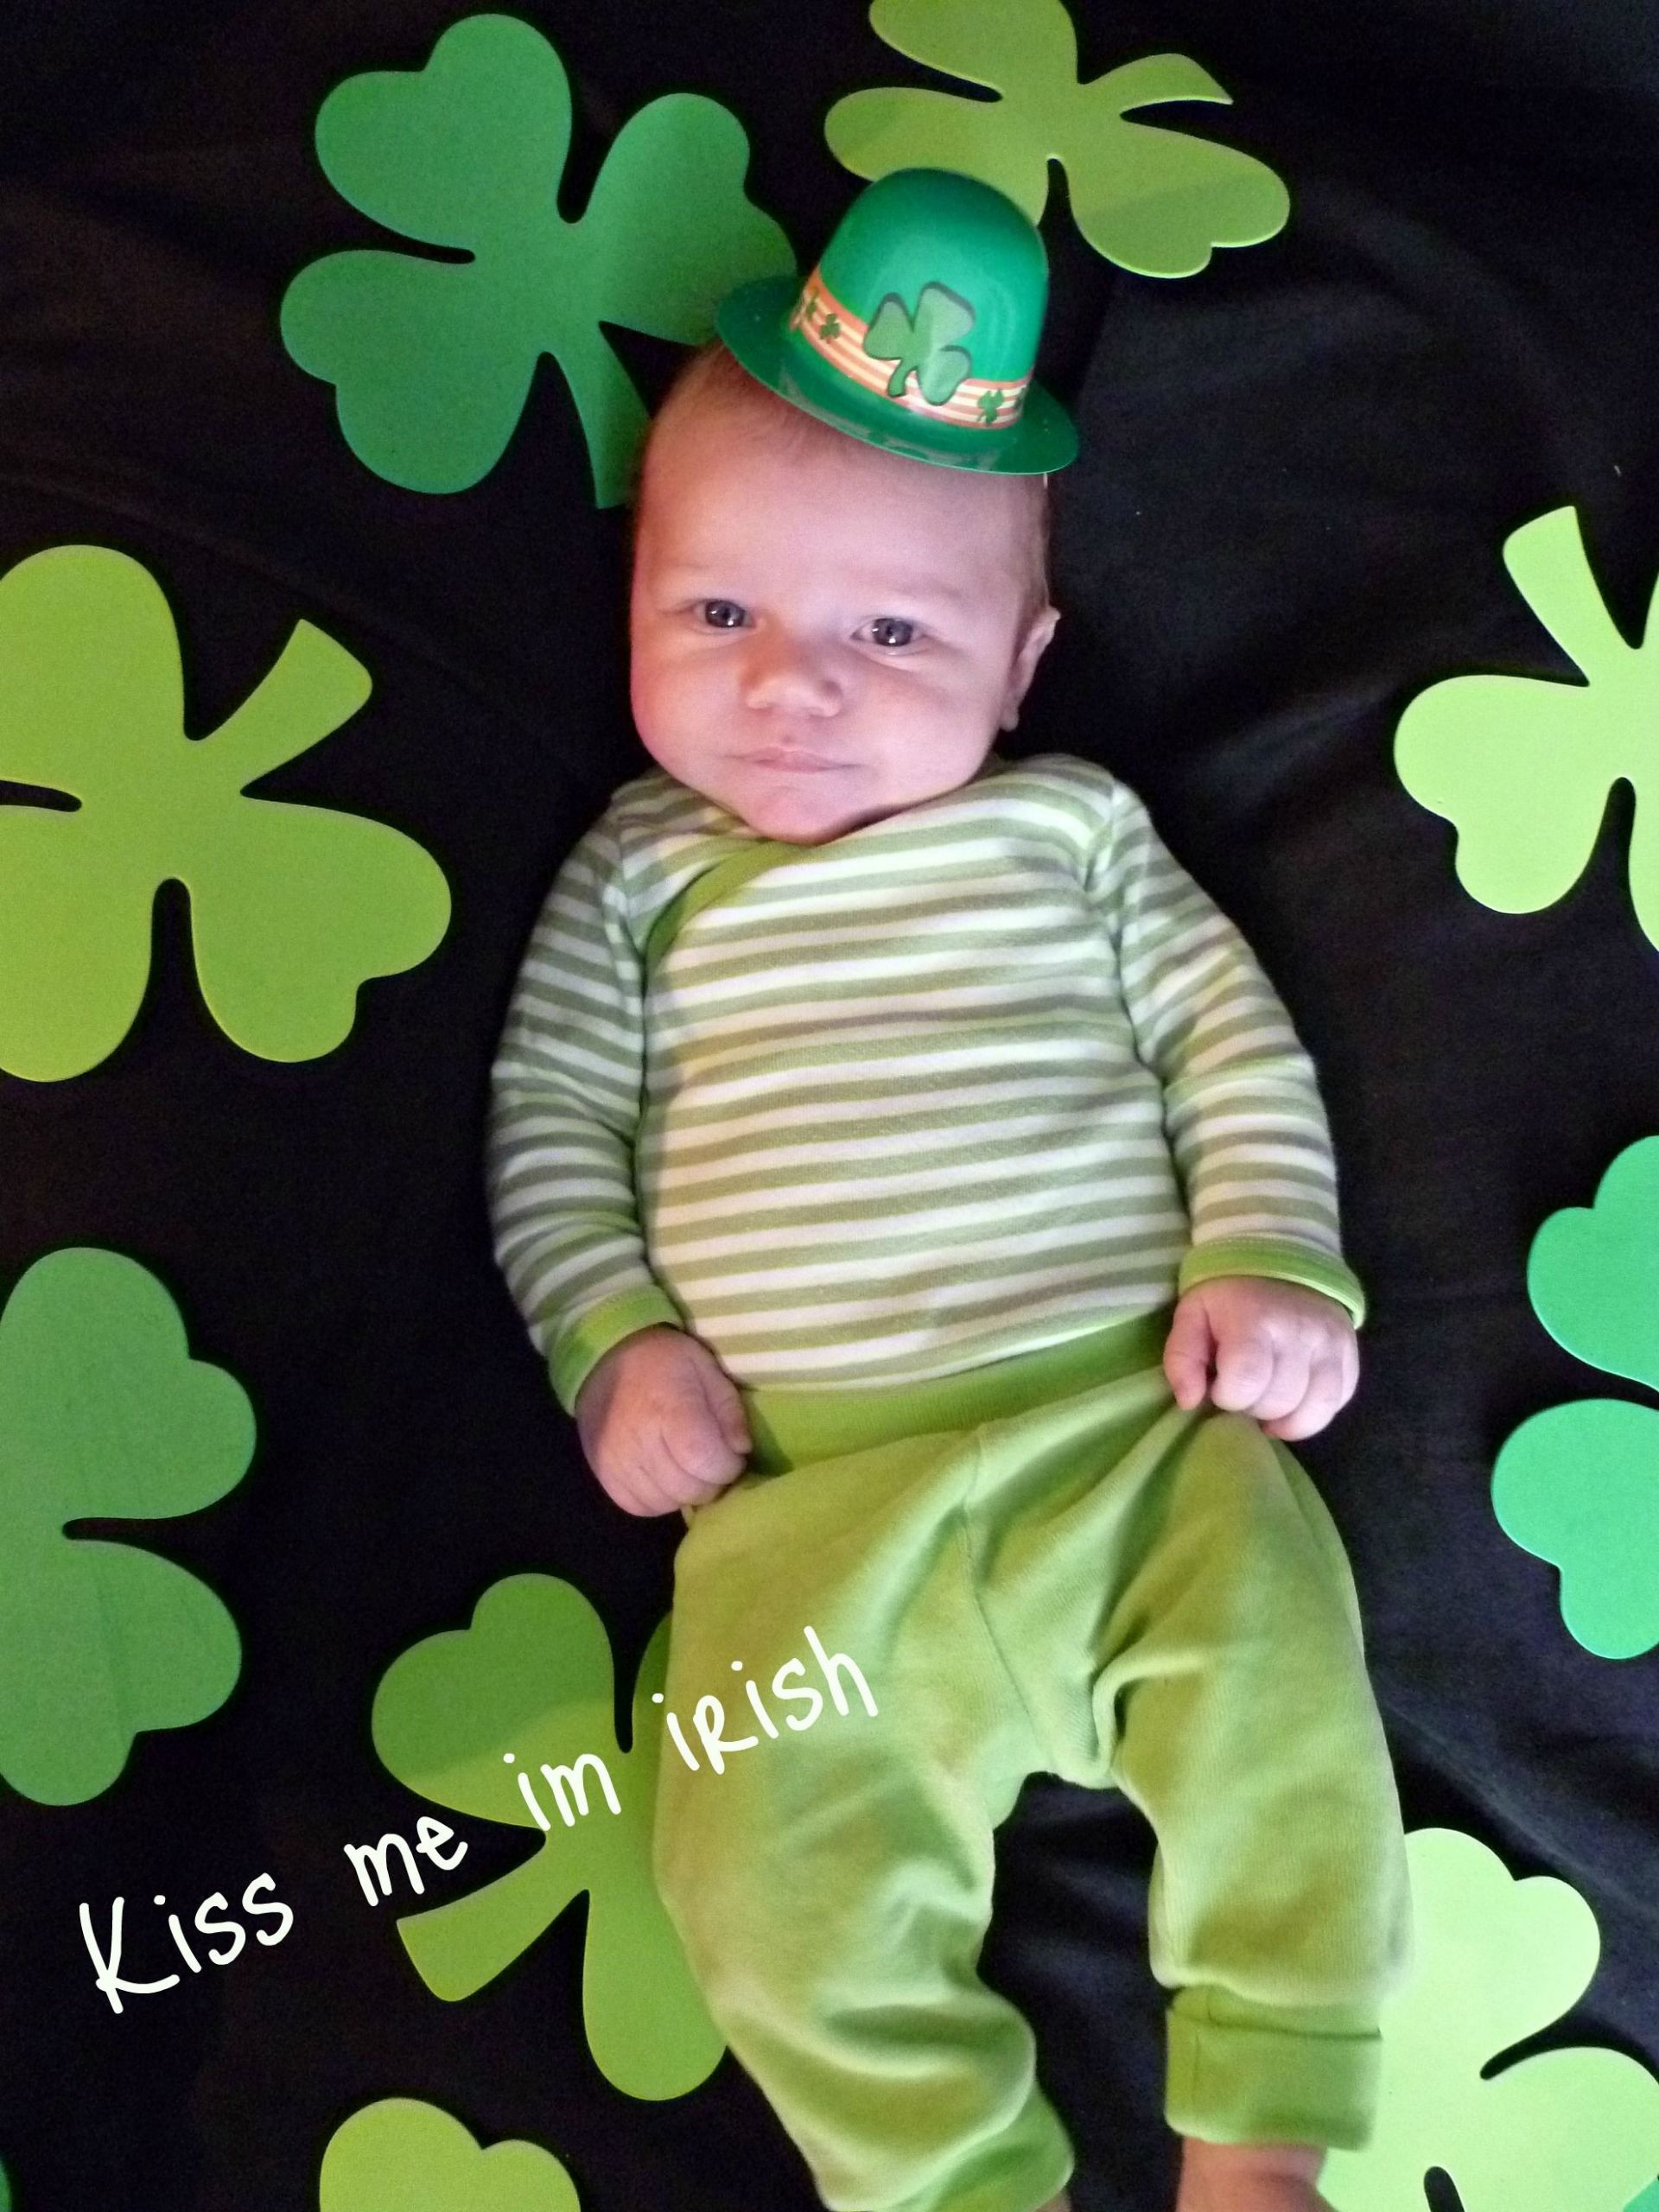 St Patrick's Day Baby Picture Ideas
 St Pattys day picture of my little one